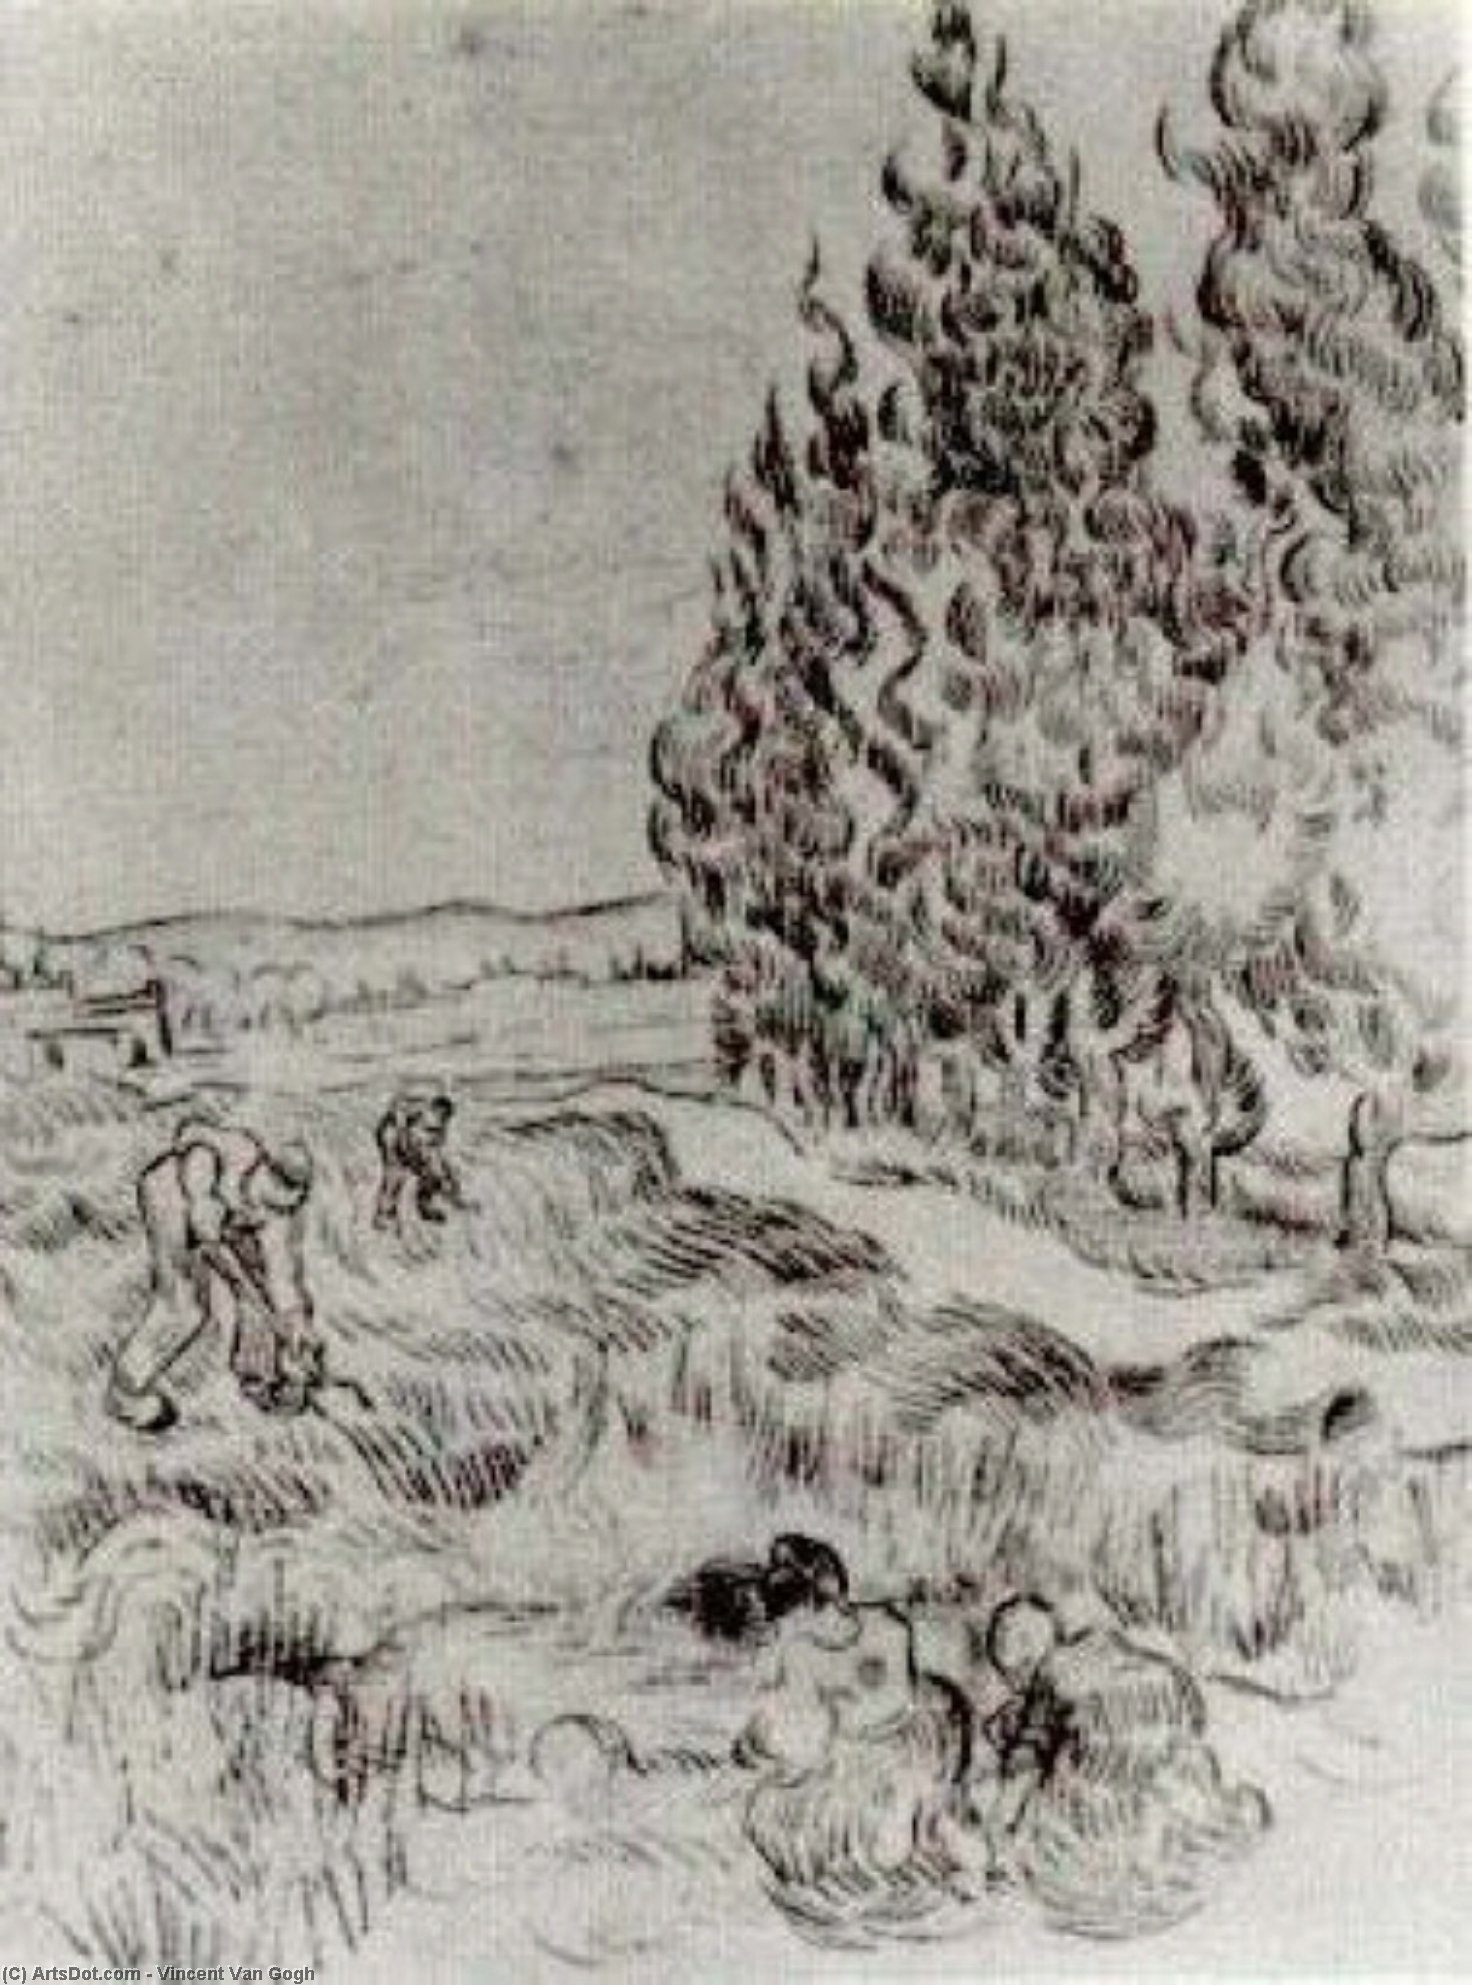 WikiOO.org - Güzel Sanatlar Ansiklopedisi - Resim, Resimler Vincent Van Gogh - Cypresses with Four People Working in the Field